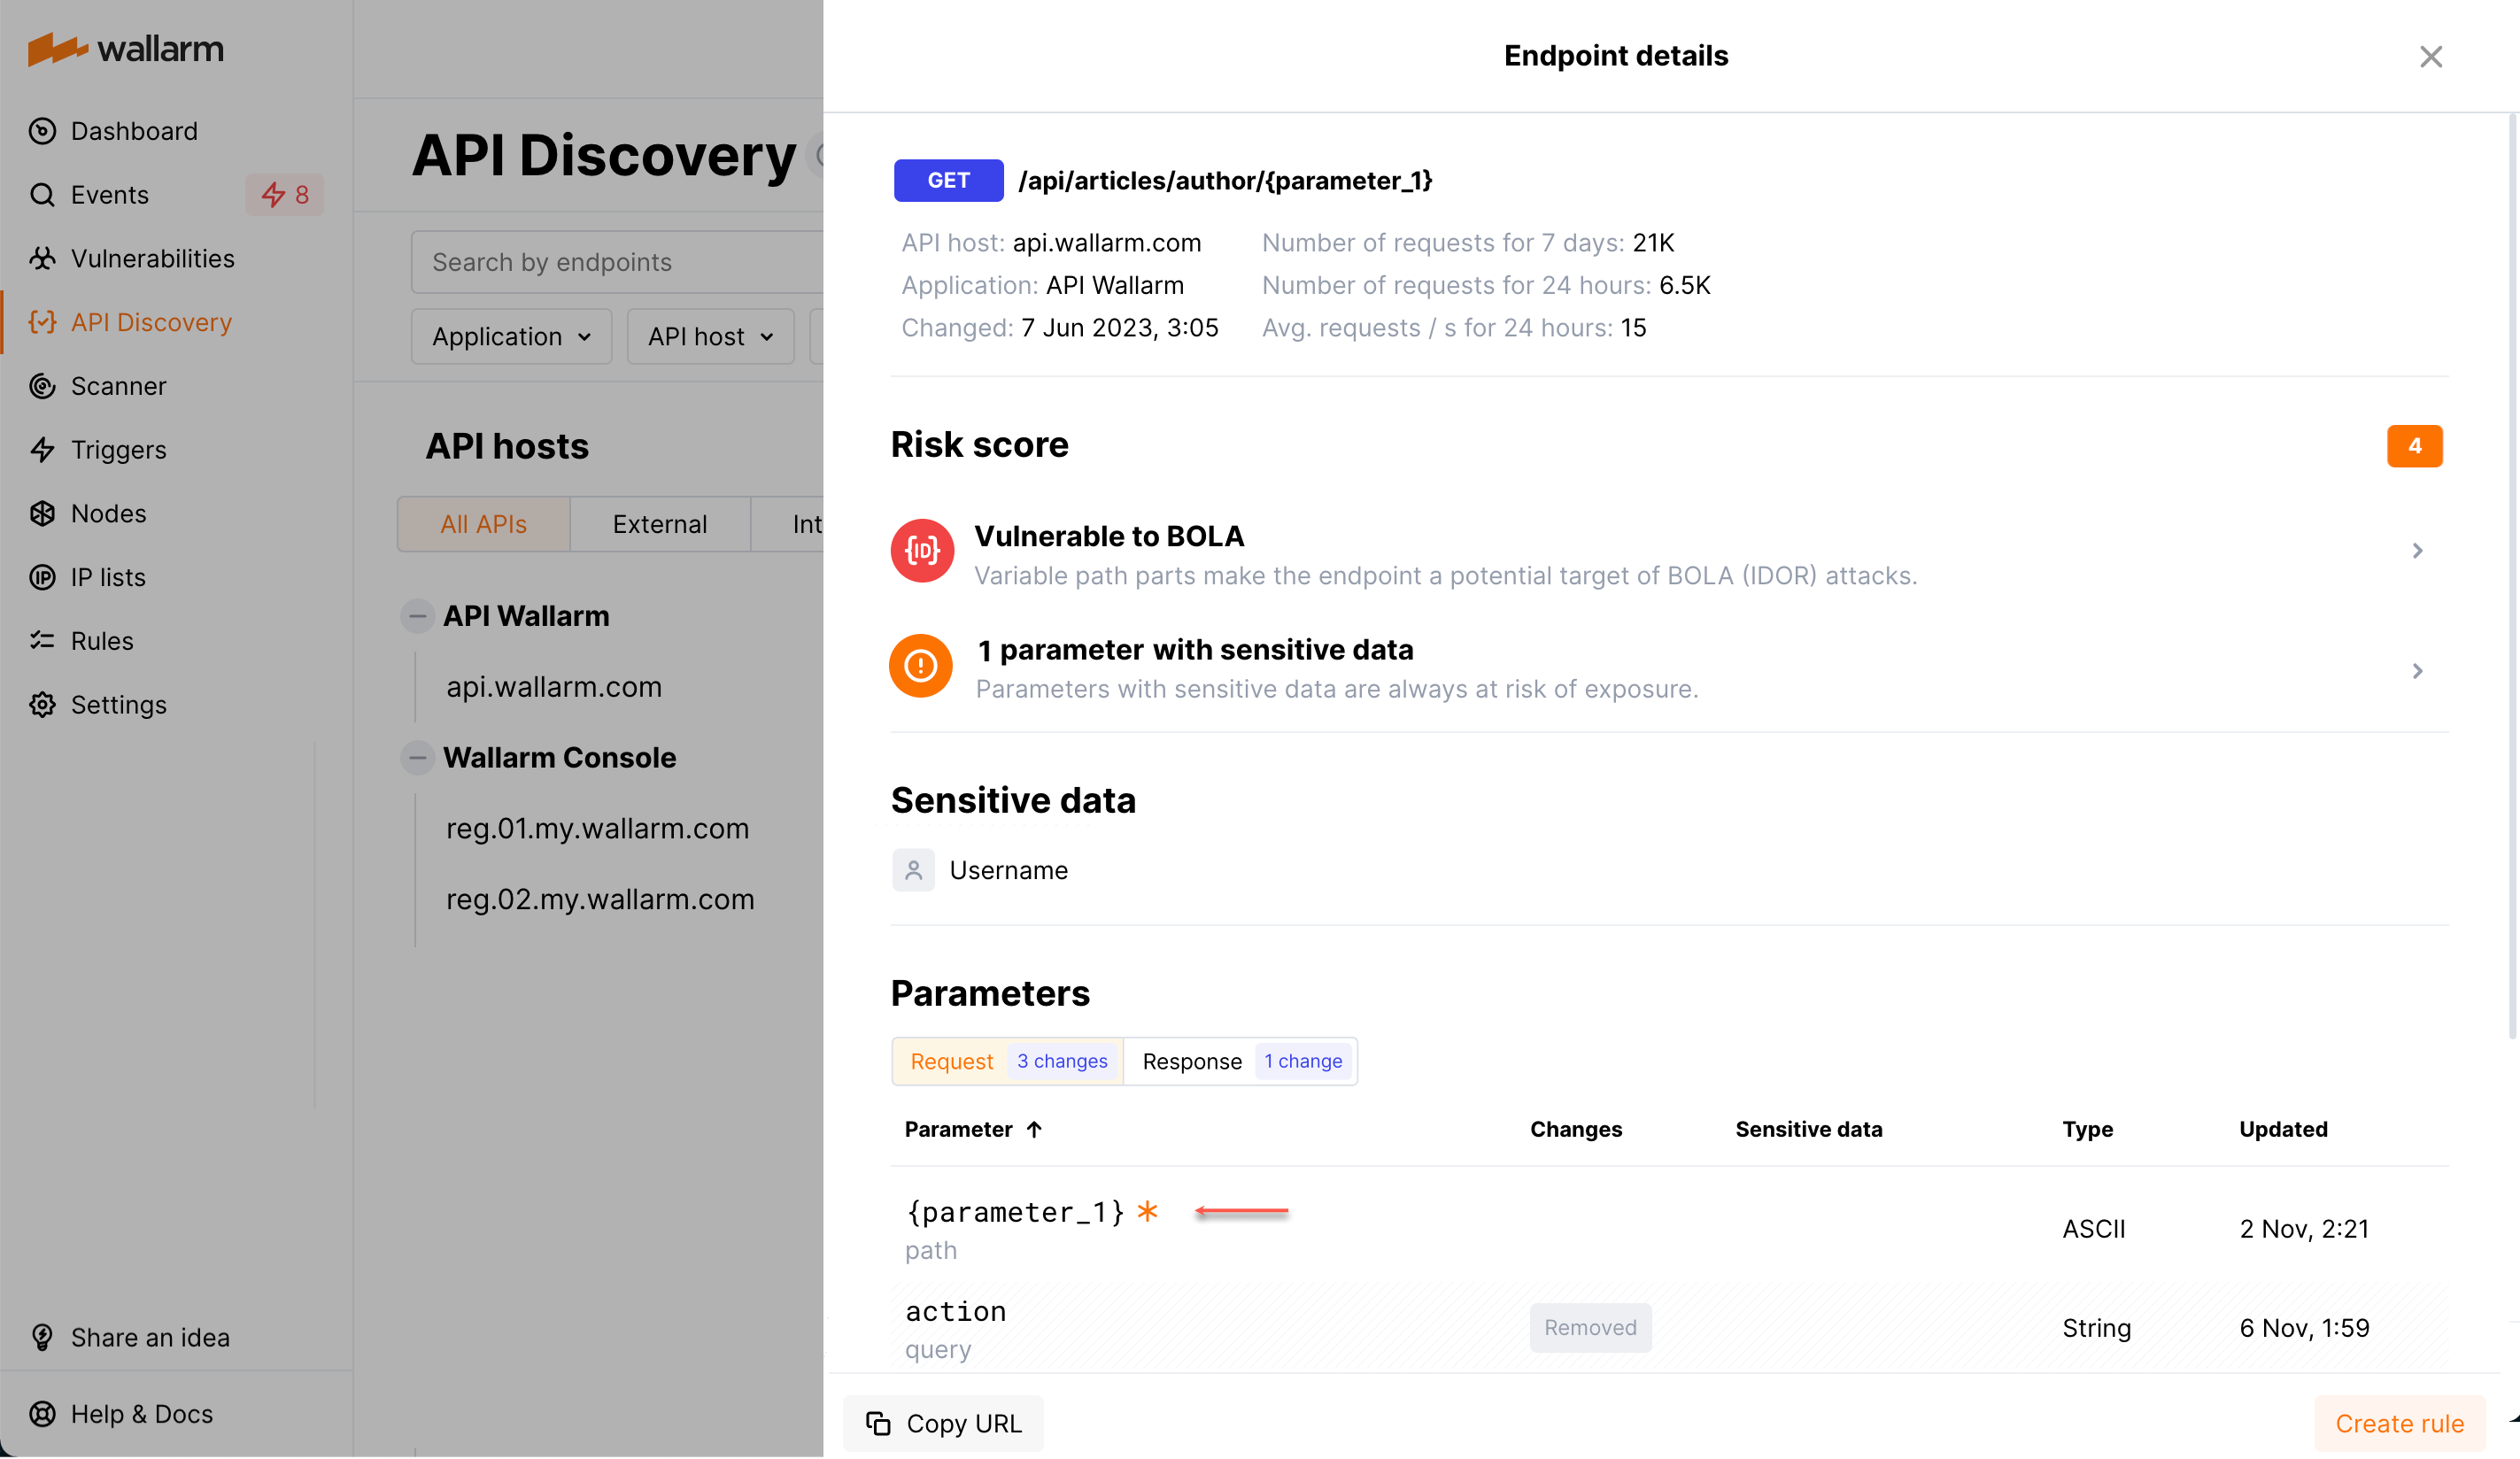 API Discovery - Variability in path